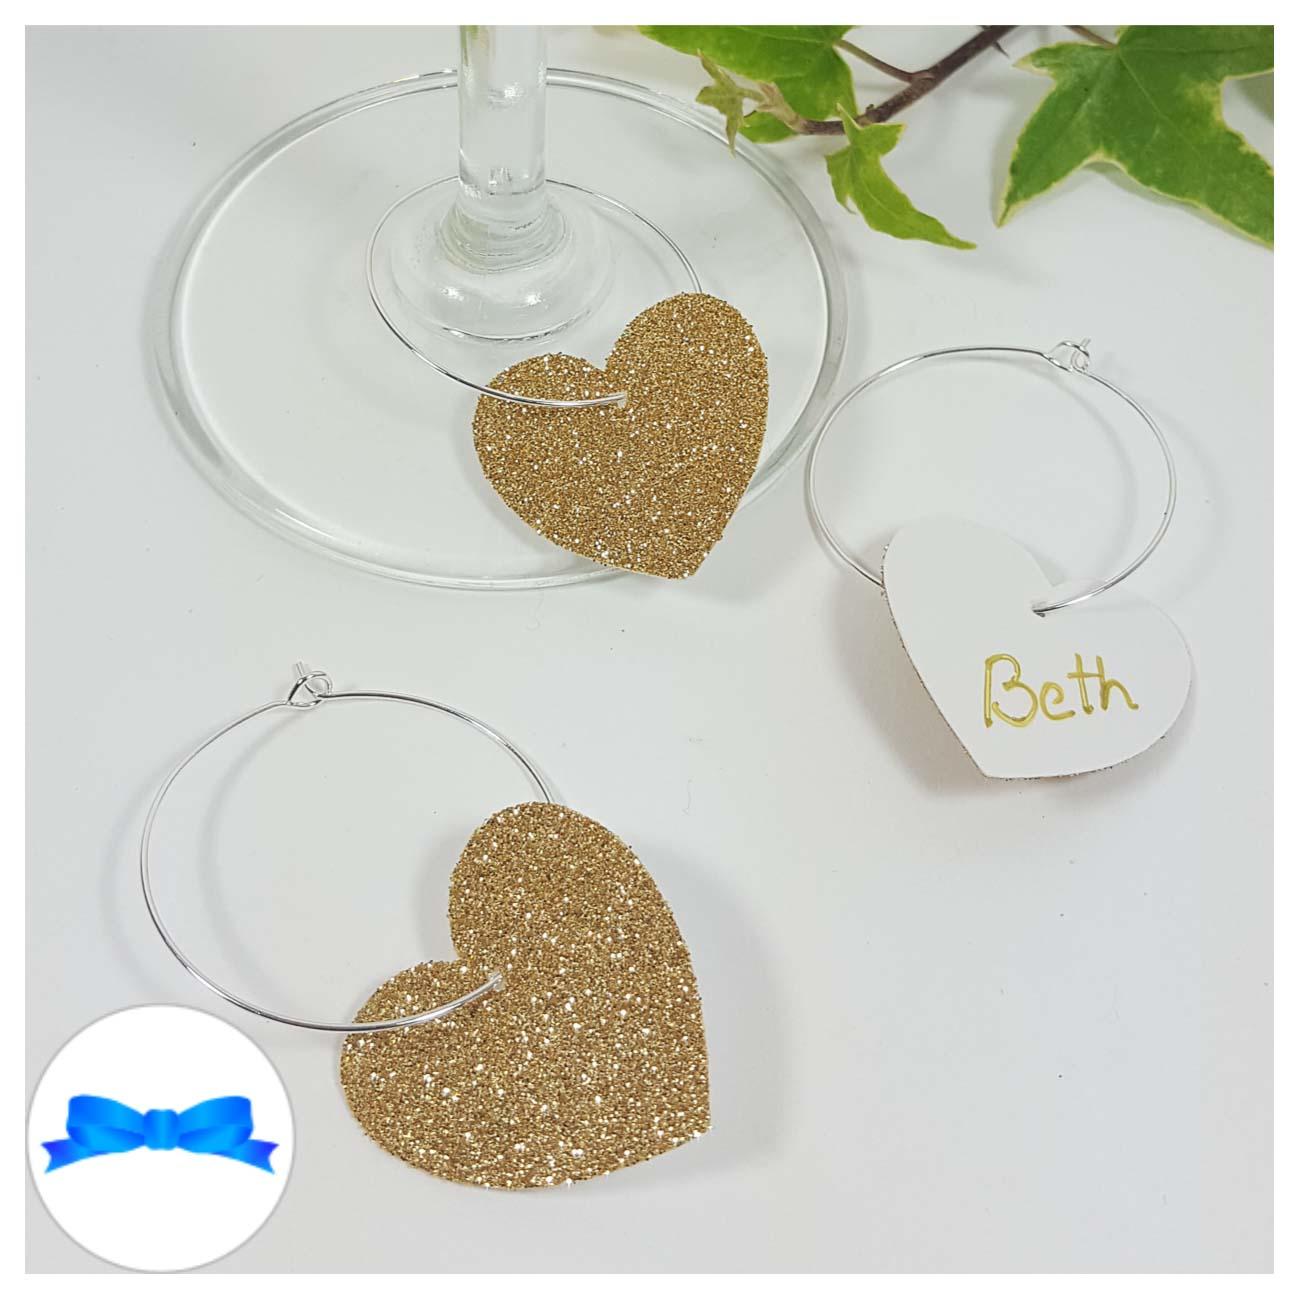 Gold glitter wine glass charm to write names on